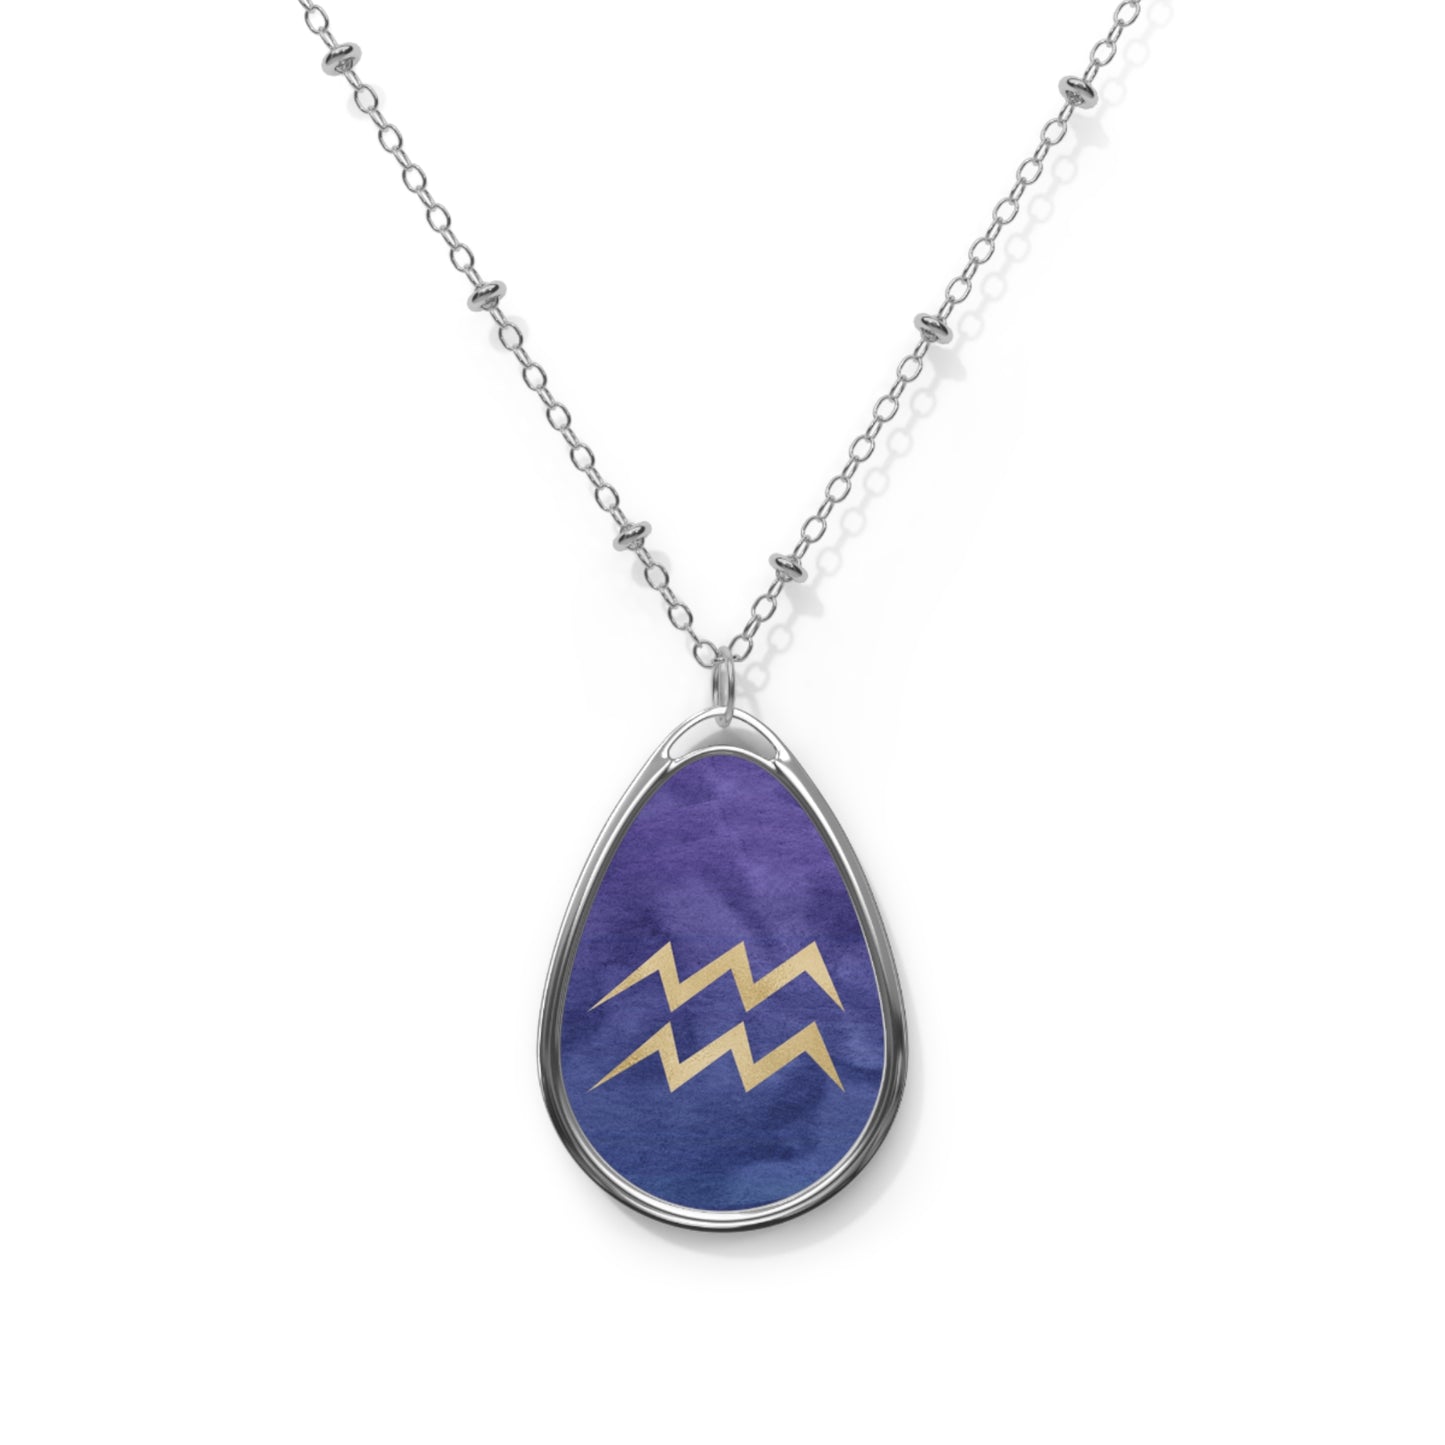 Aquarius Zodiac Sign ~ Aquarius Sign in Gold on Blue ~ Necklace & Oval Pendant With Chain